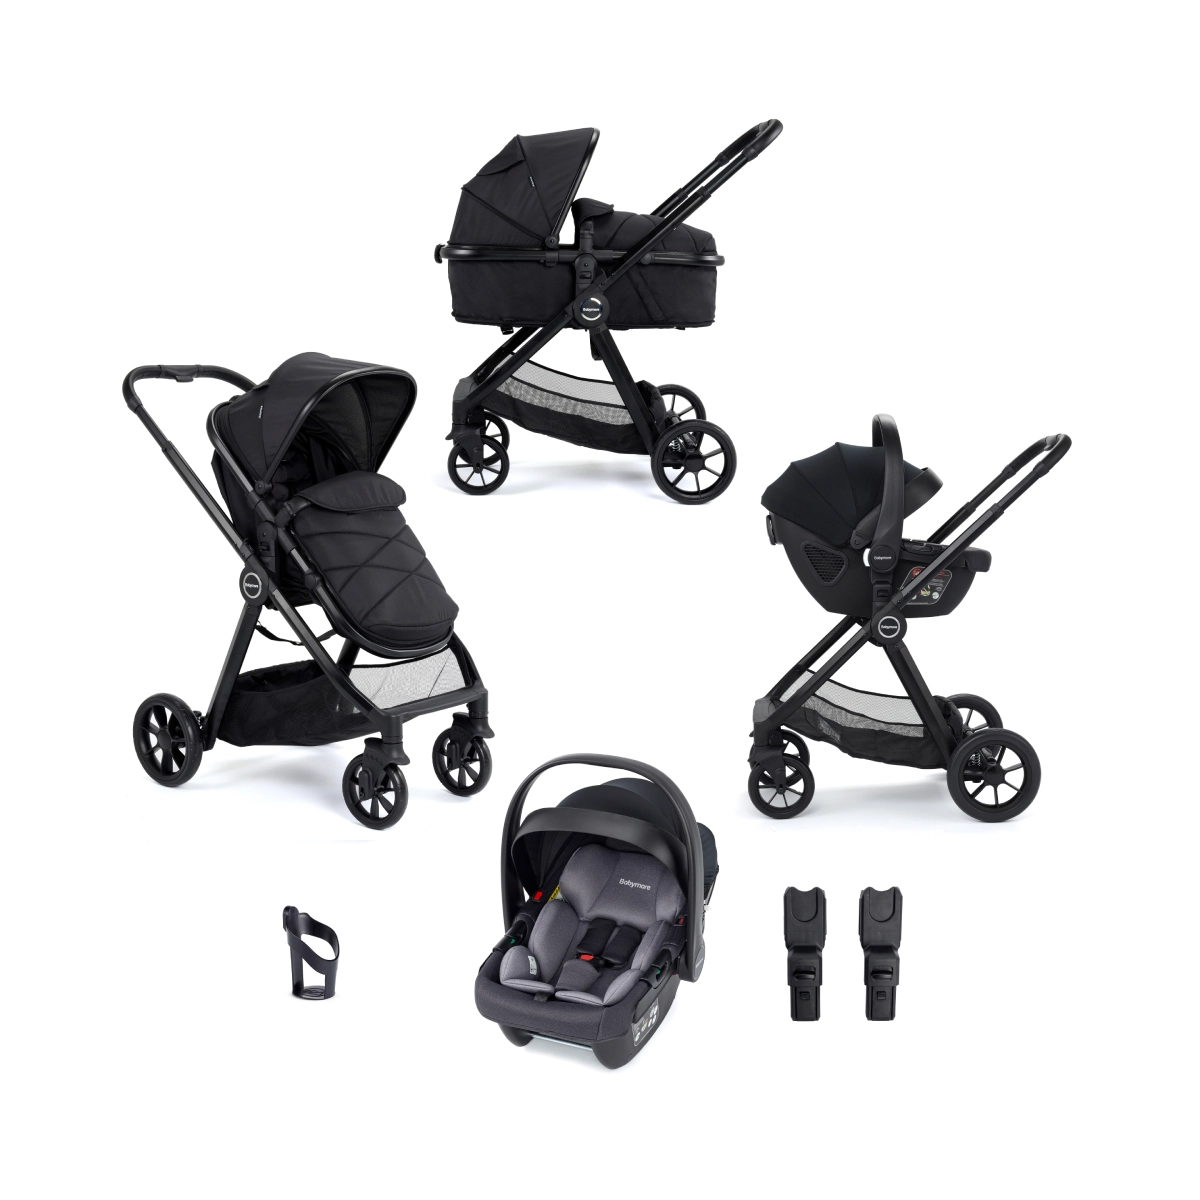 Babymore Mimi 3 in 1 Travel System Bundle with Coco i-Size Car Seat